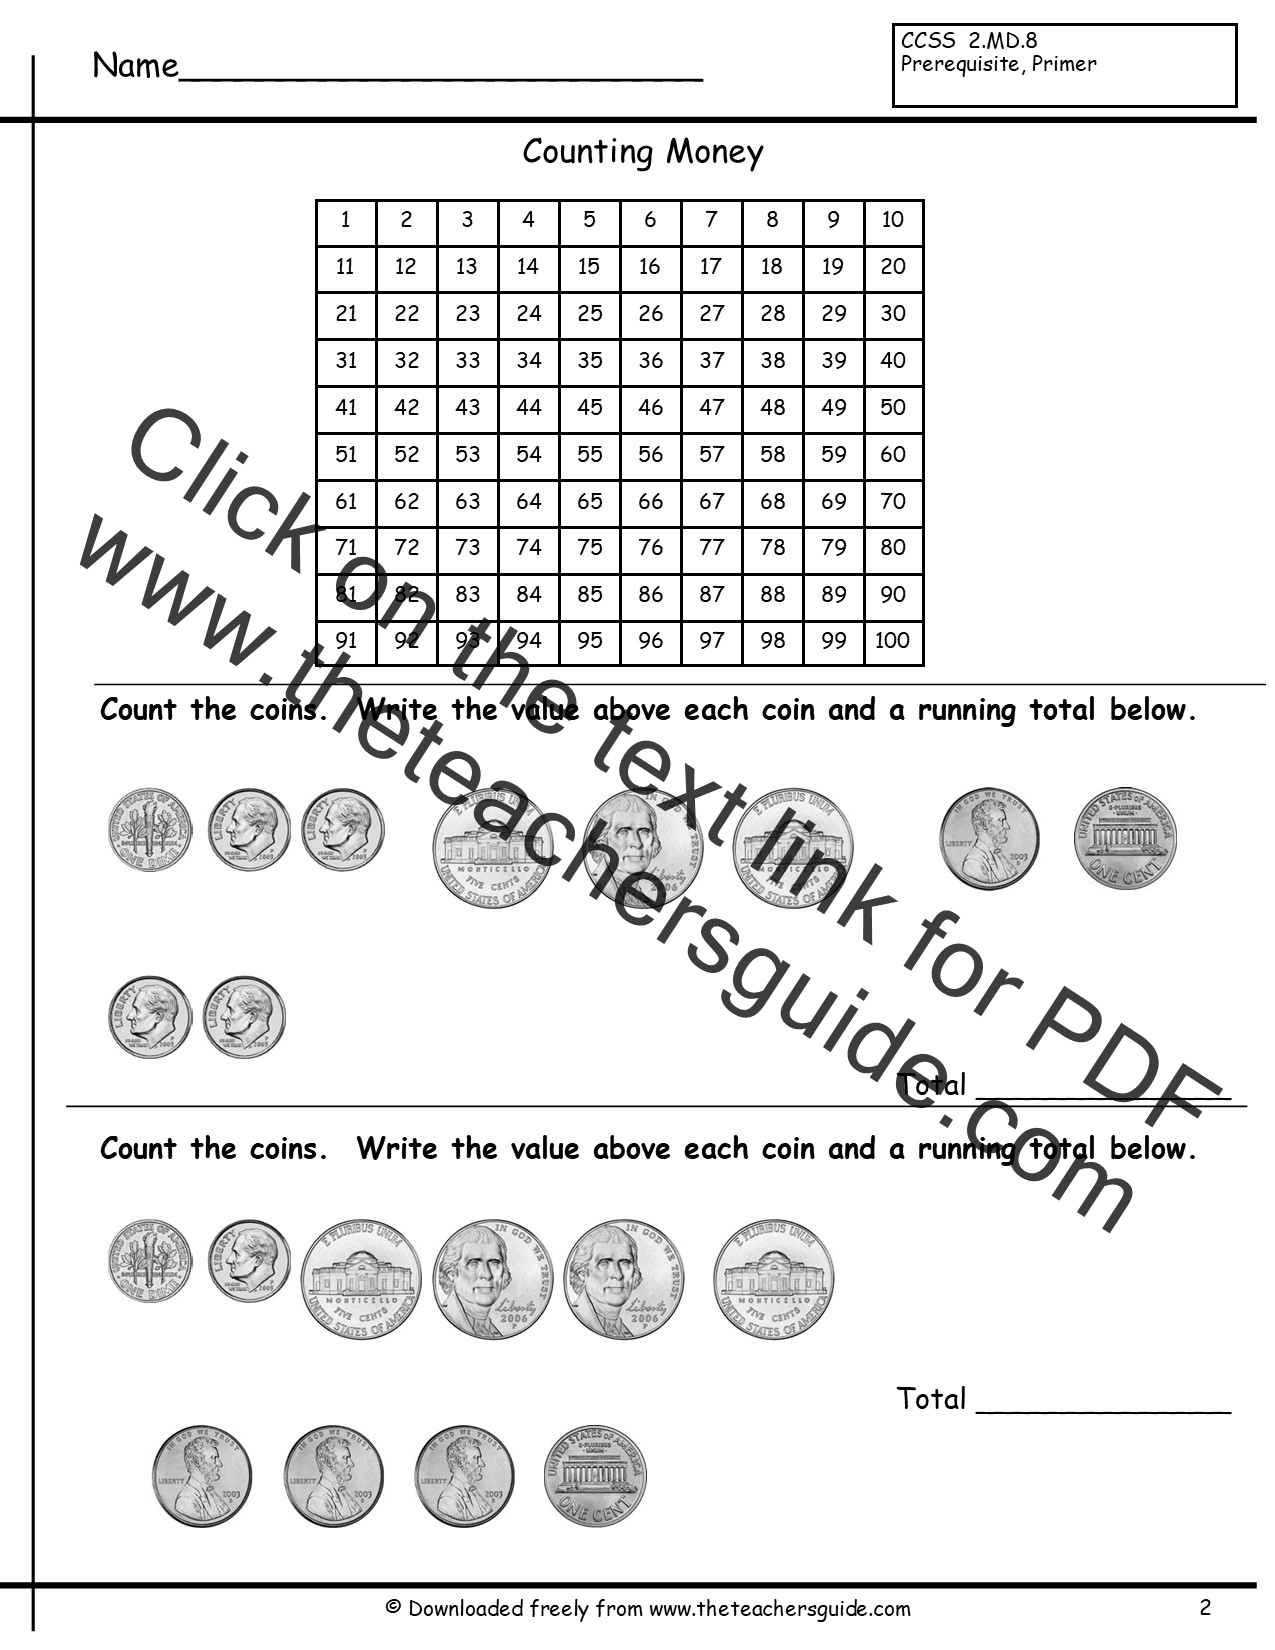 Counting Coins Worksheets From The Teacher S Guide 2nd Grade Math Worksheets Free Math Worksheets Money Math Worksheets